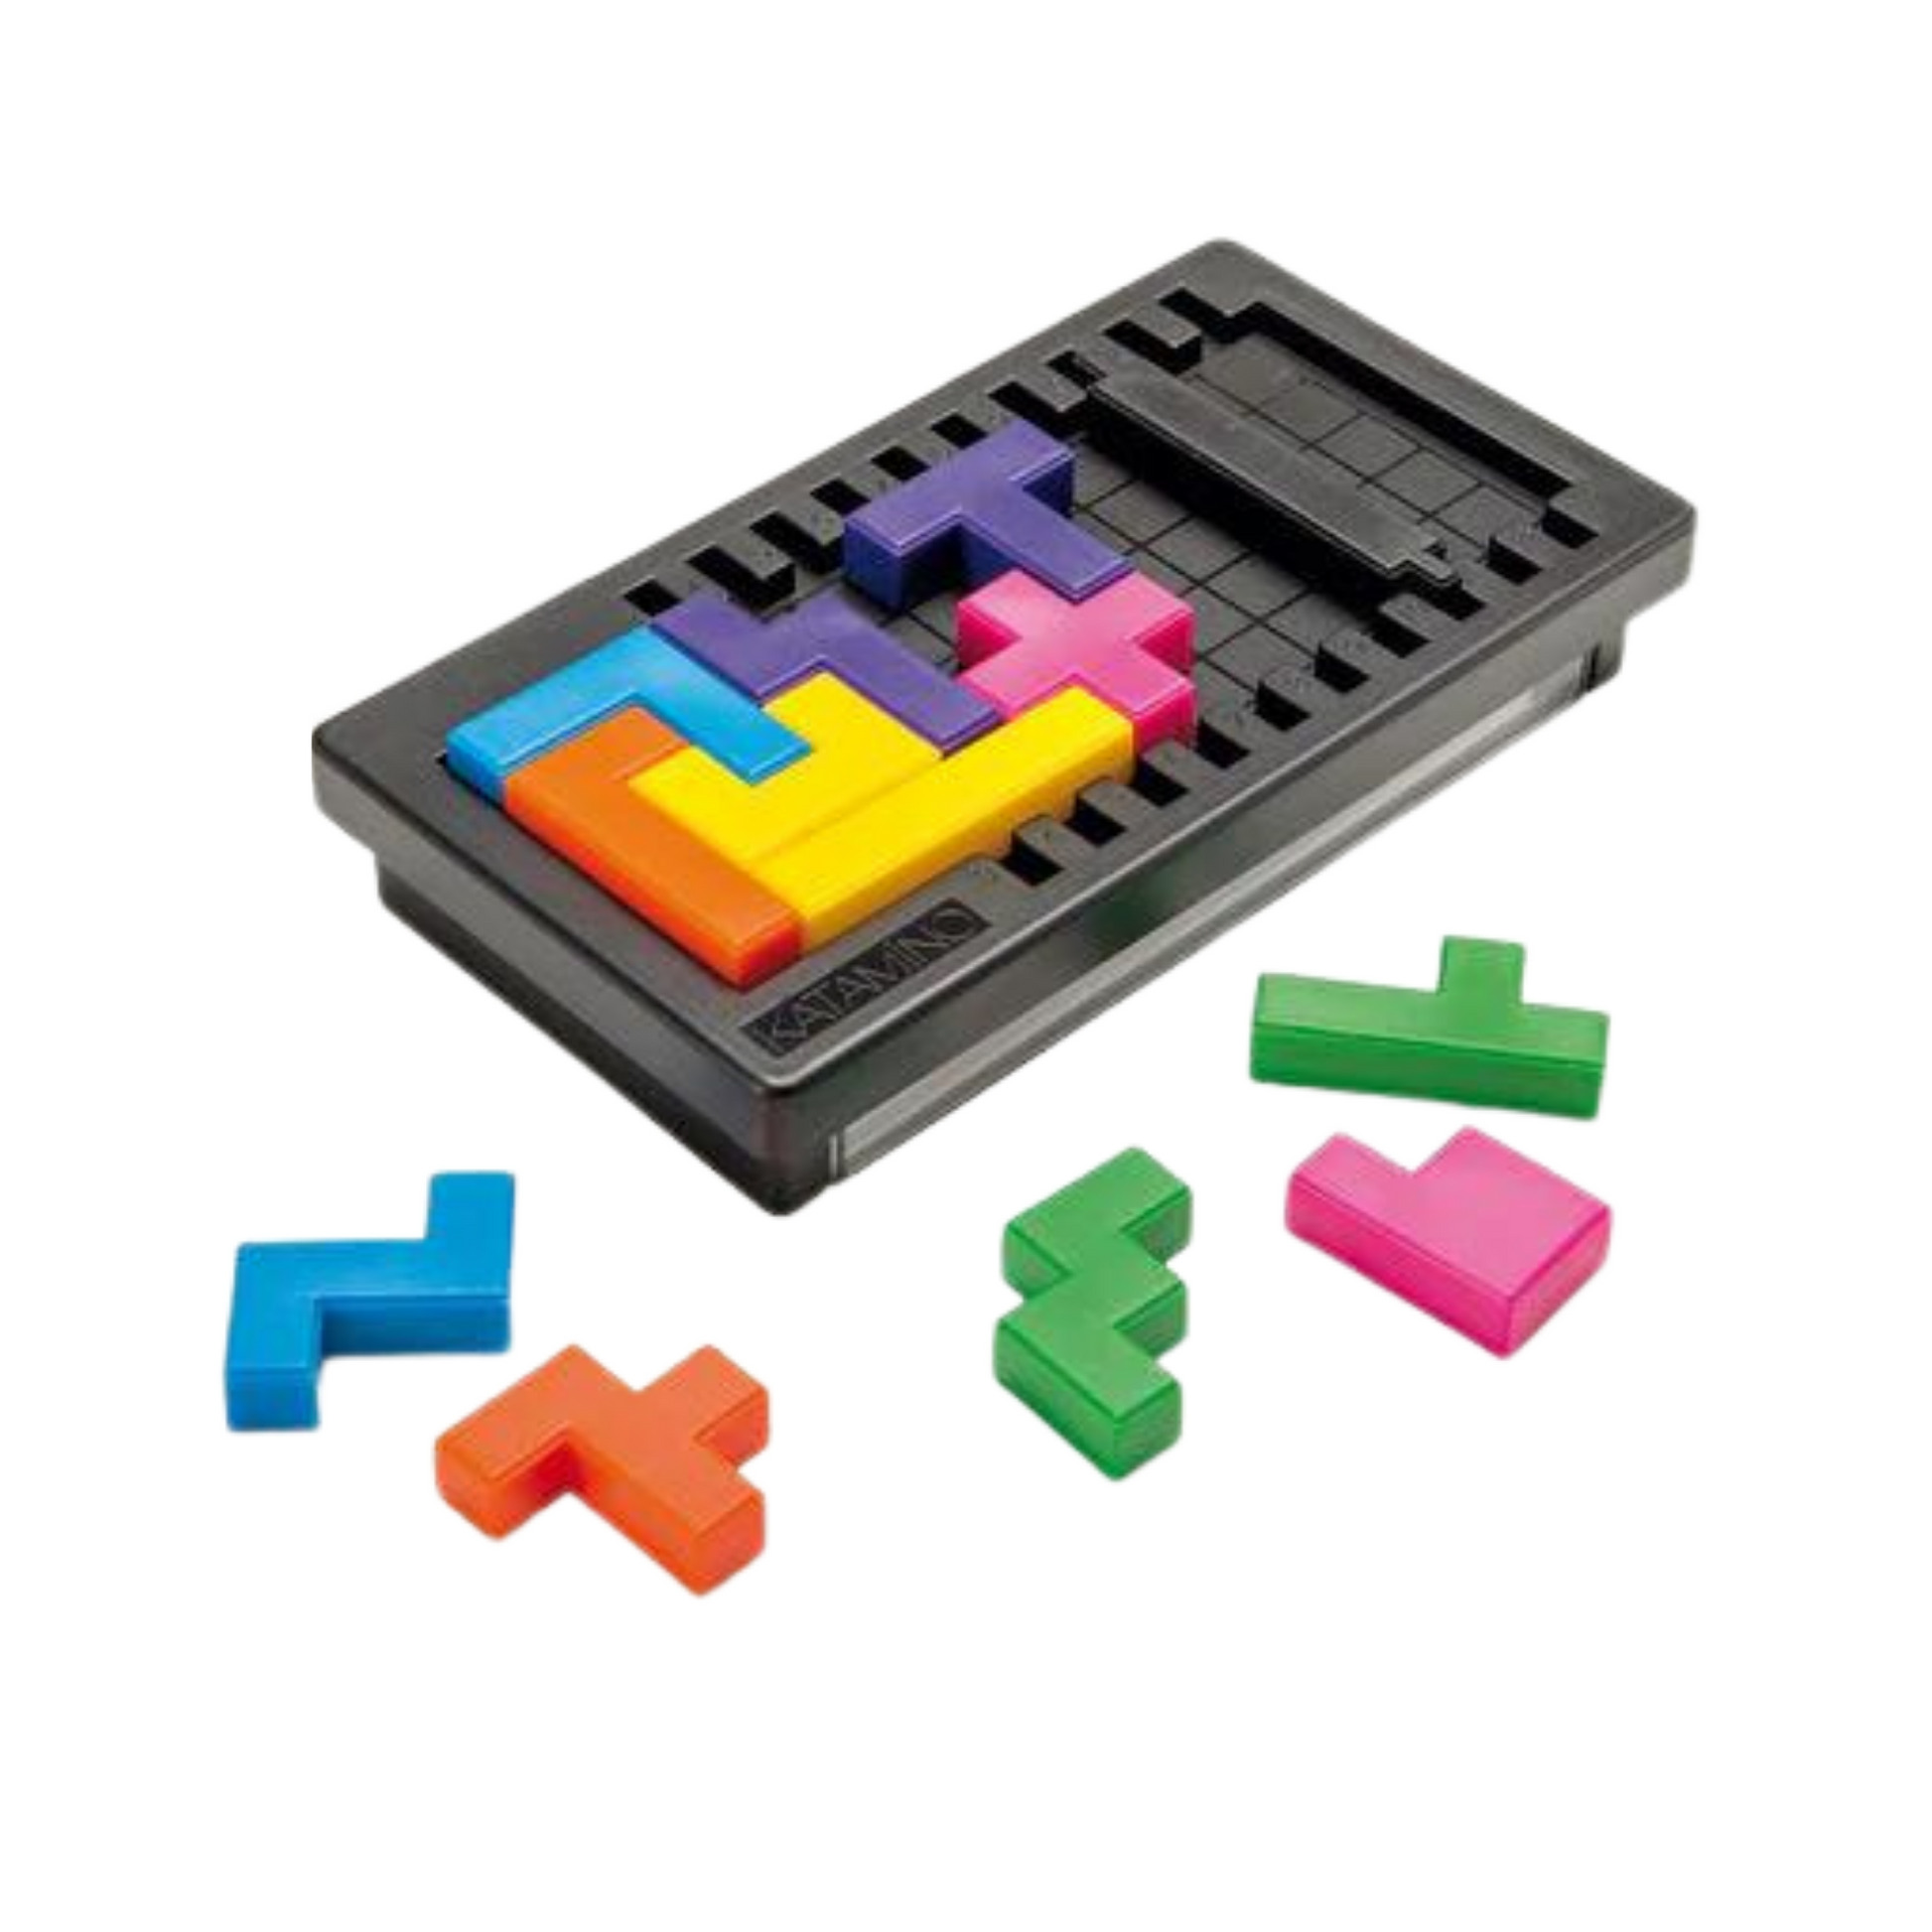 Buy [Gigamic] Gigamic Katamino Pocket KATAMINO POCKET Puzzle Game Mini Size  GZKP 3.421271.302049 Toy Educational Toy Children Brain Training Board Game  [Parallel Import] from Japan - Buy authentic Plus exclusive items from